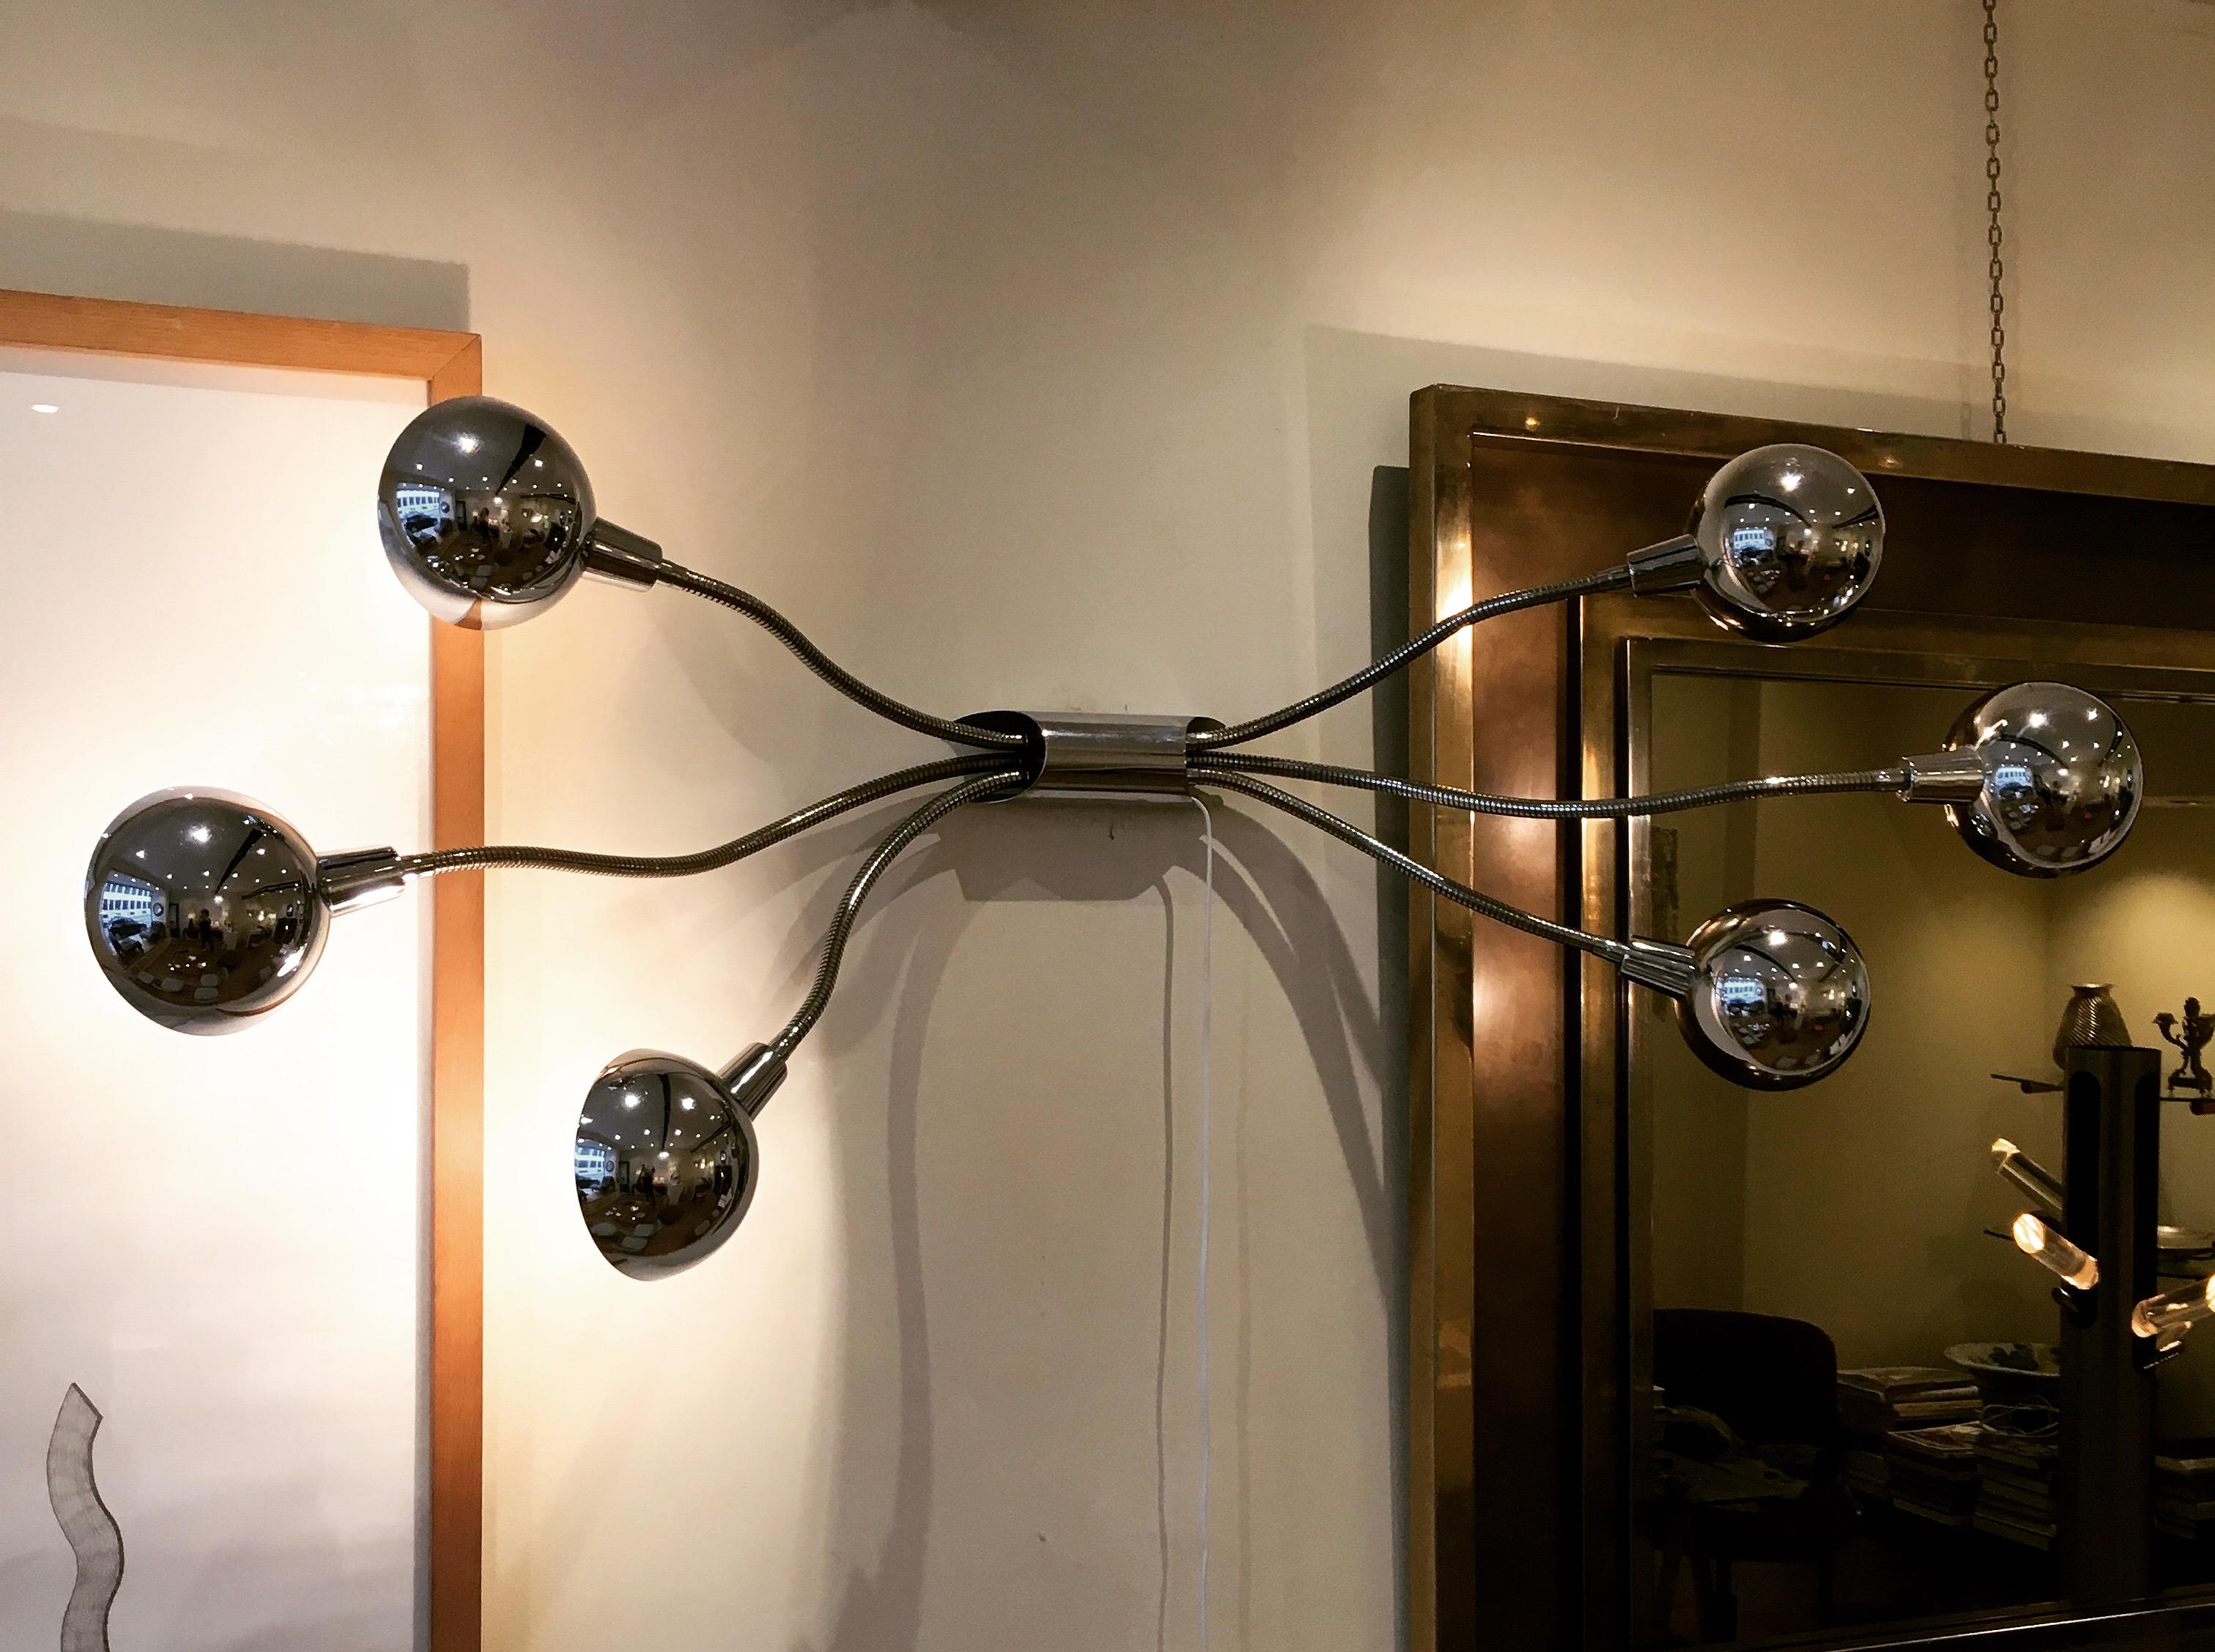 Rare applique by the French designer Pierre Folie, known as “Hydra”. It dates circa 1960s. It is made of chrome metal. All the arms are movable in any direction.

Please not that the size from bottom to top straight arms is 170cm.